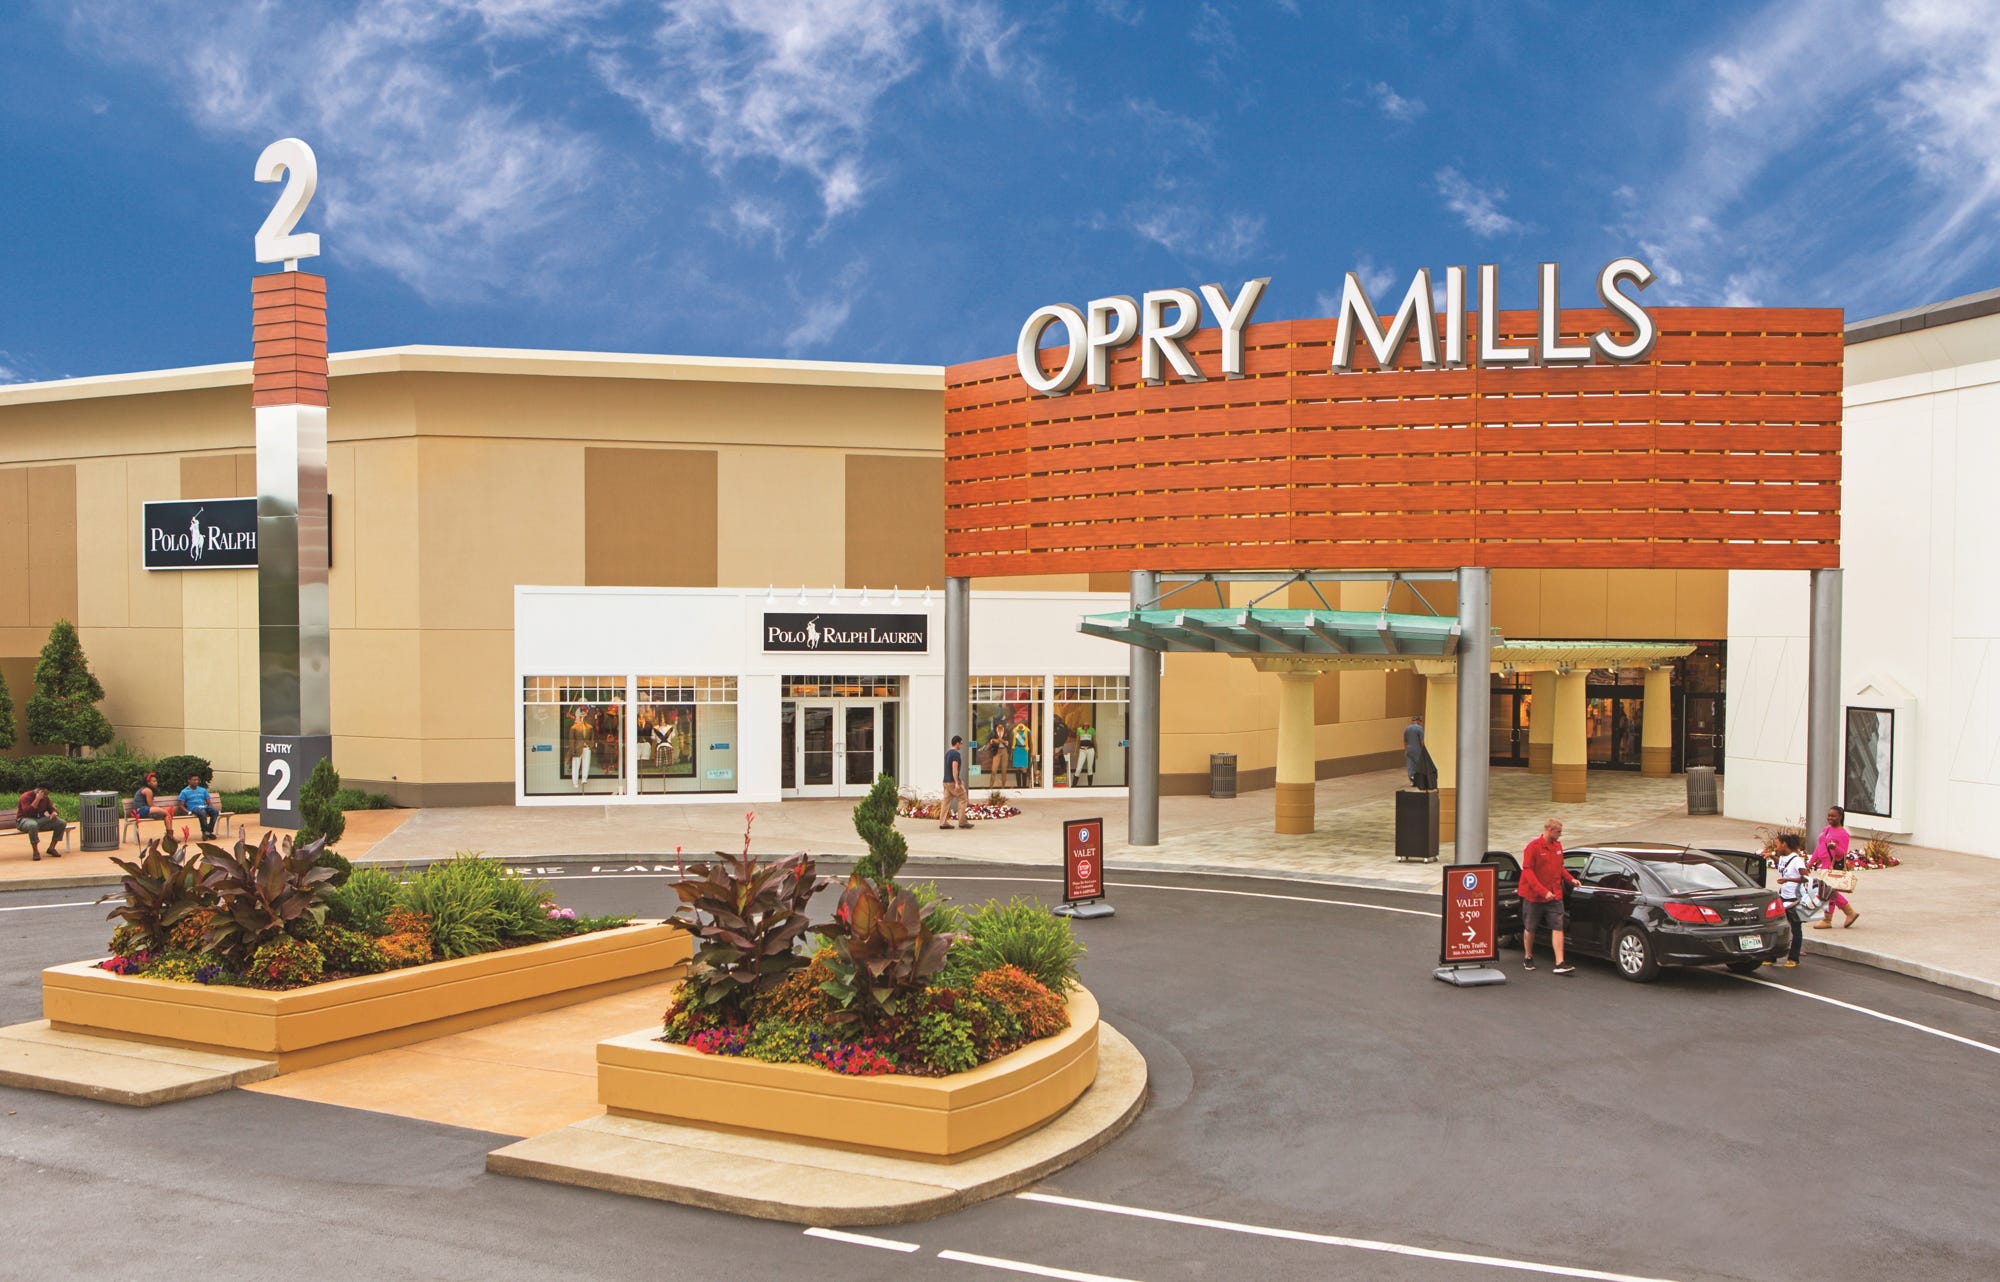 clarks outlet opry mills